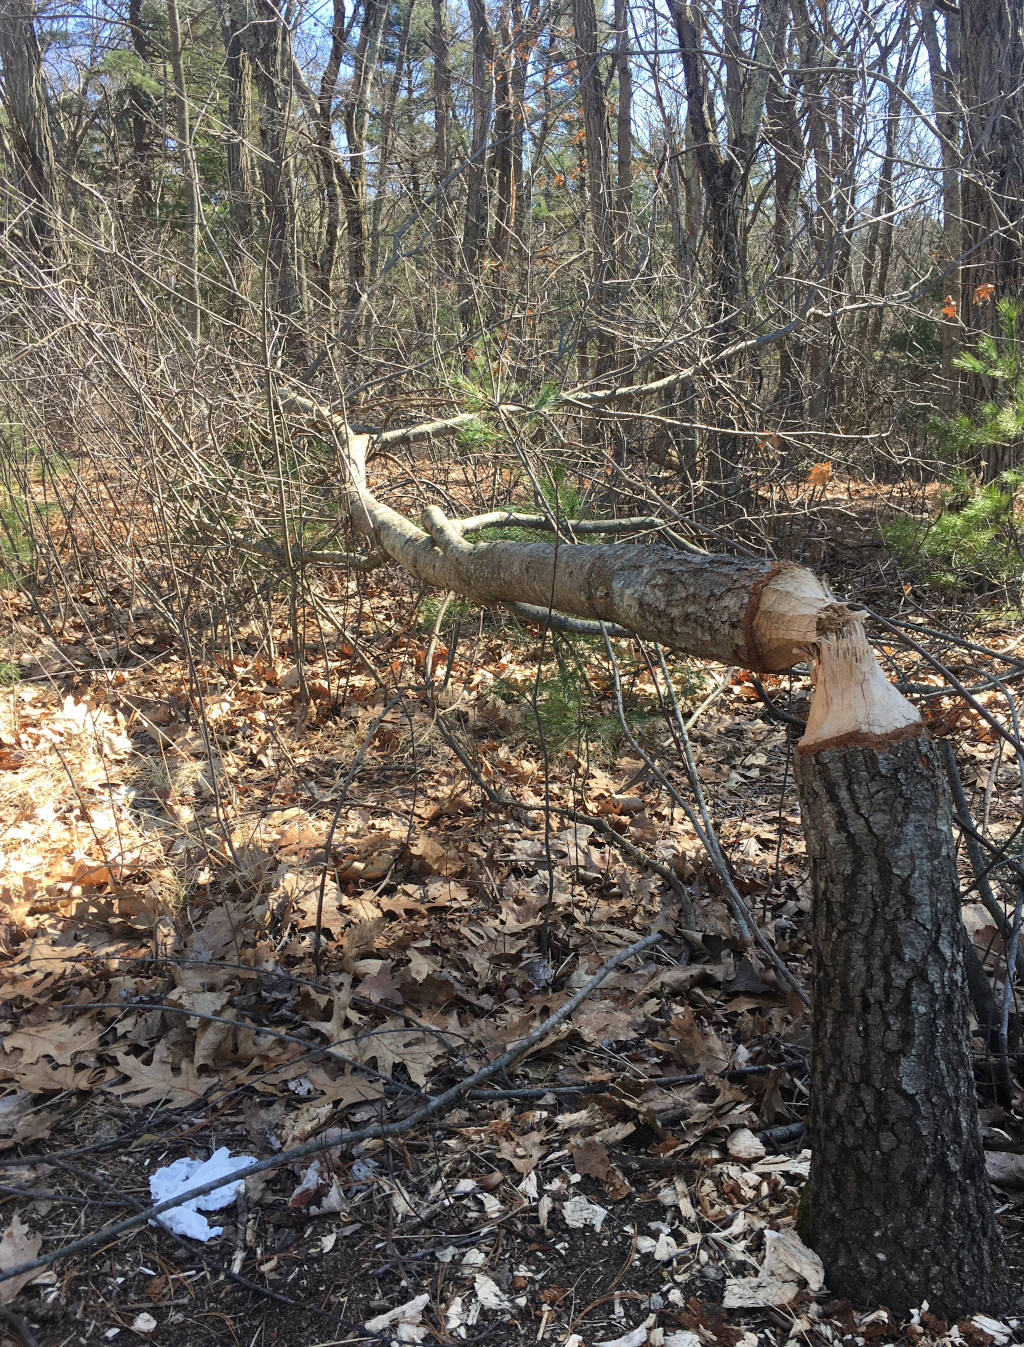 A beaver-felled tree - not tree near the water is safe